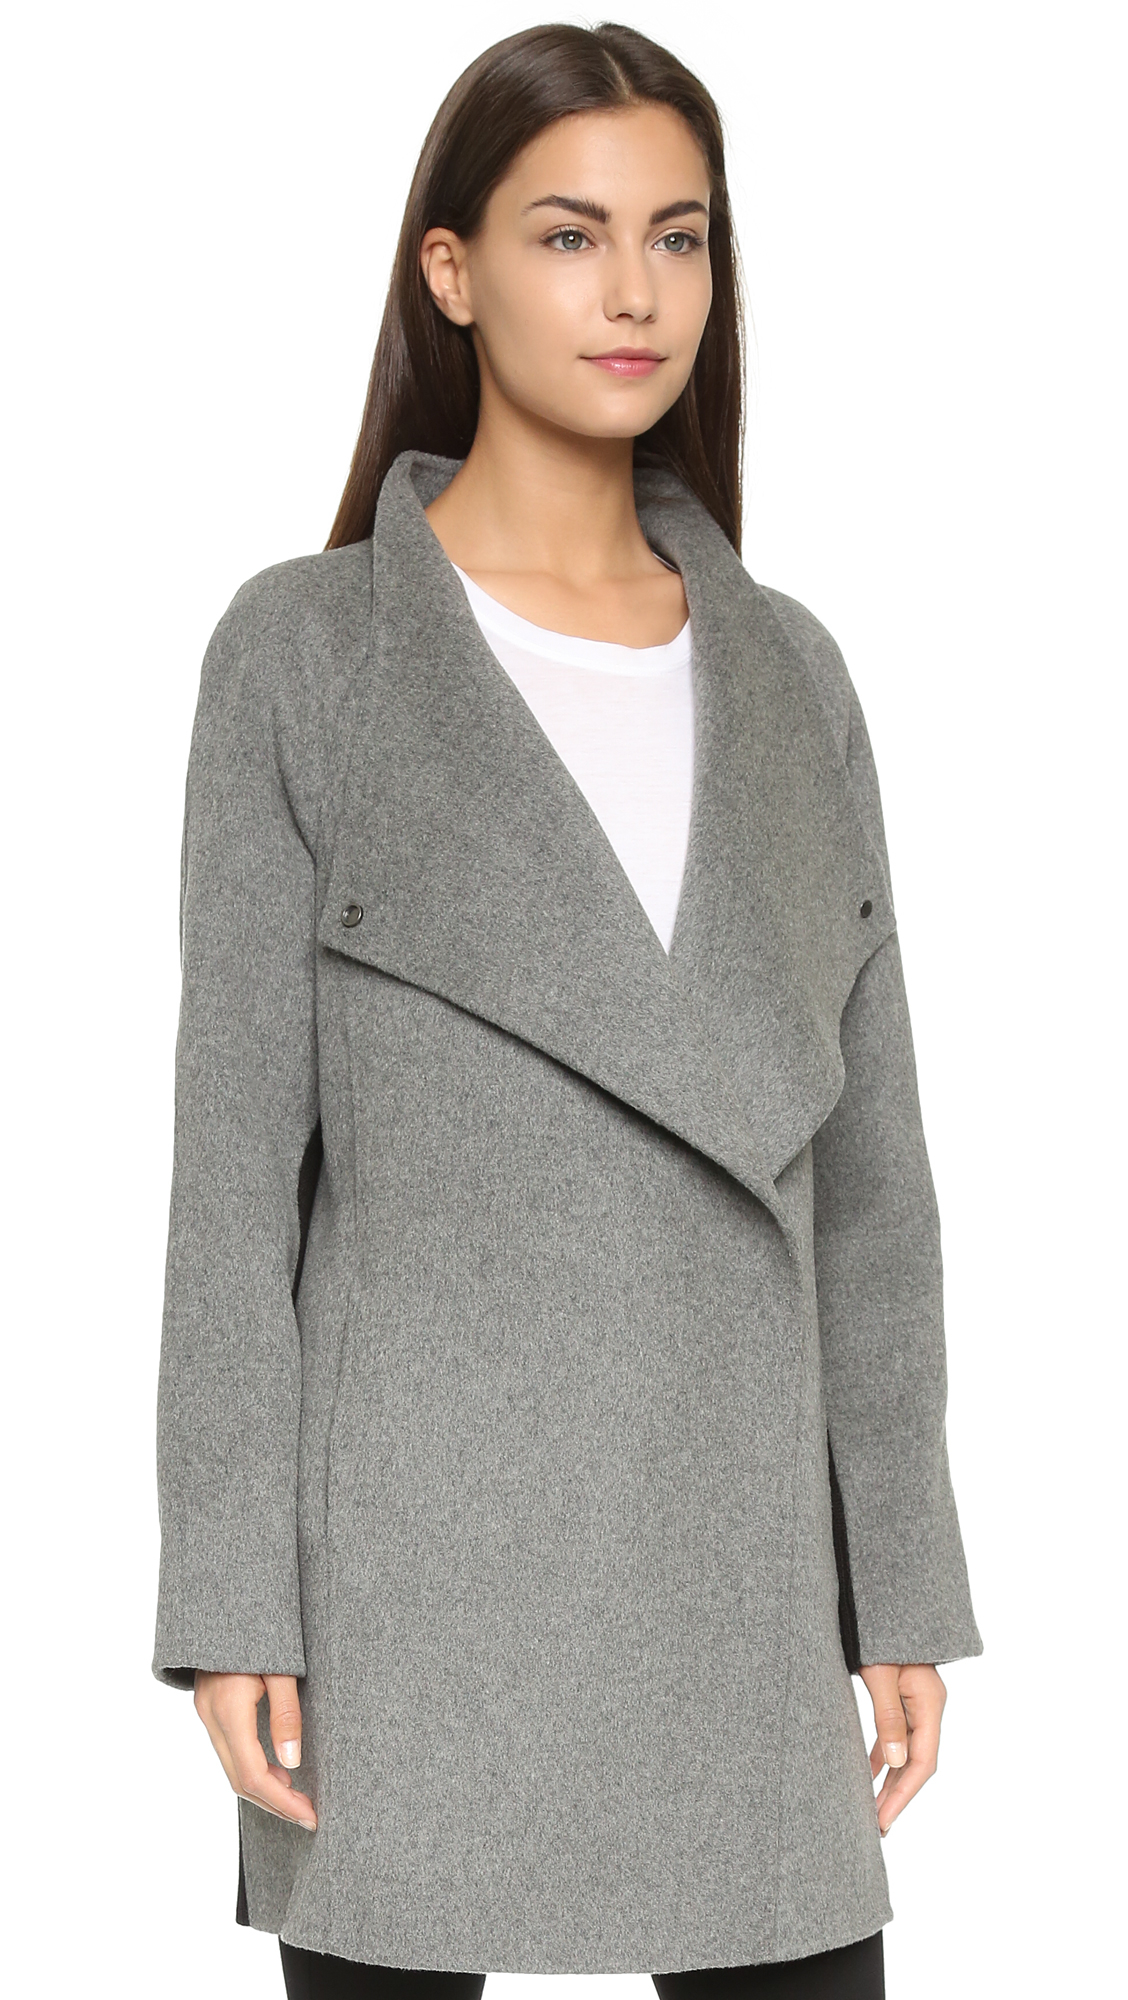 Lyst - Vince Two Tone Sweater Coat - Charcoal Melange/black in Gray